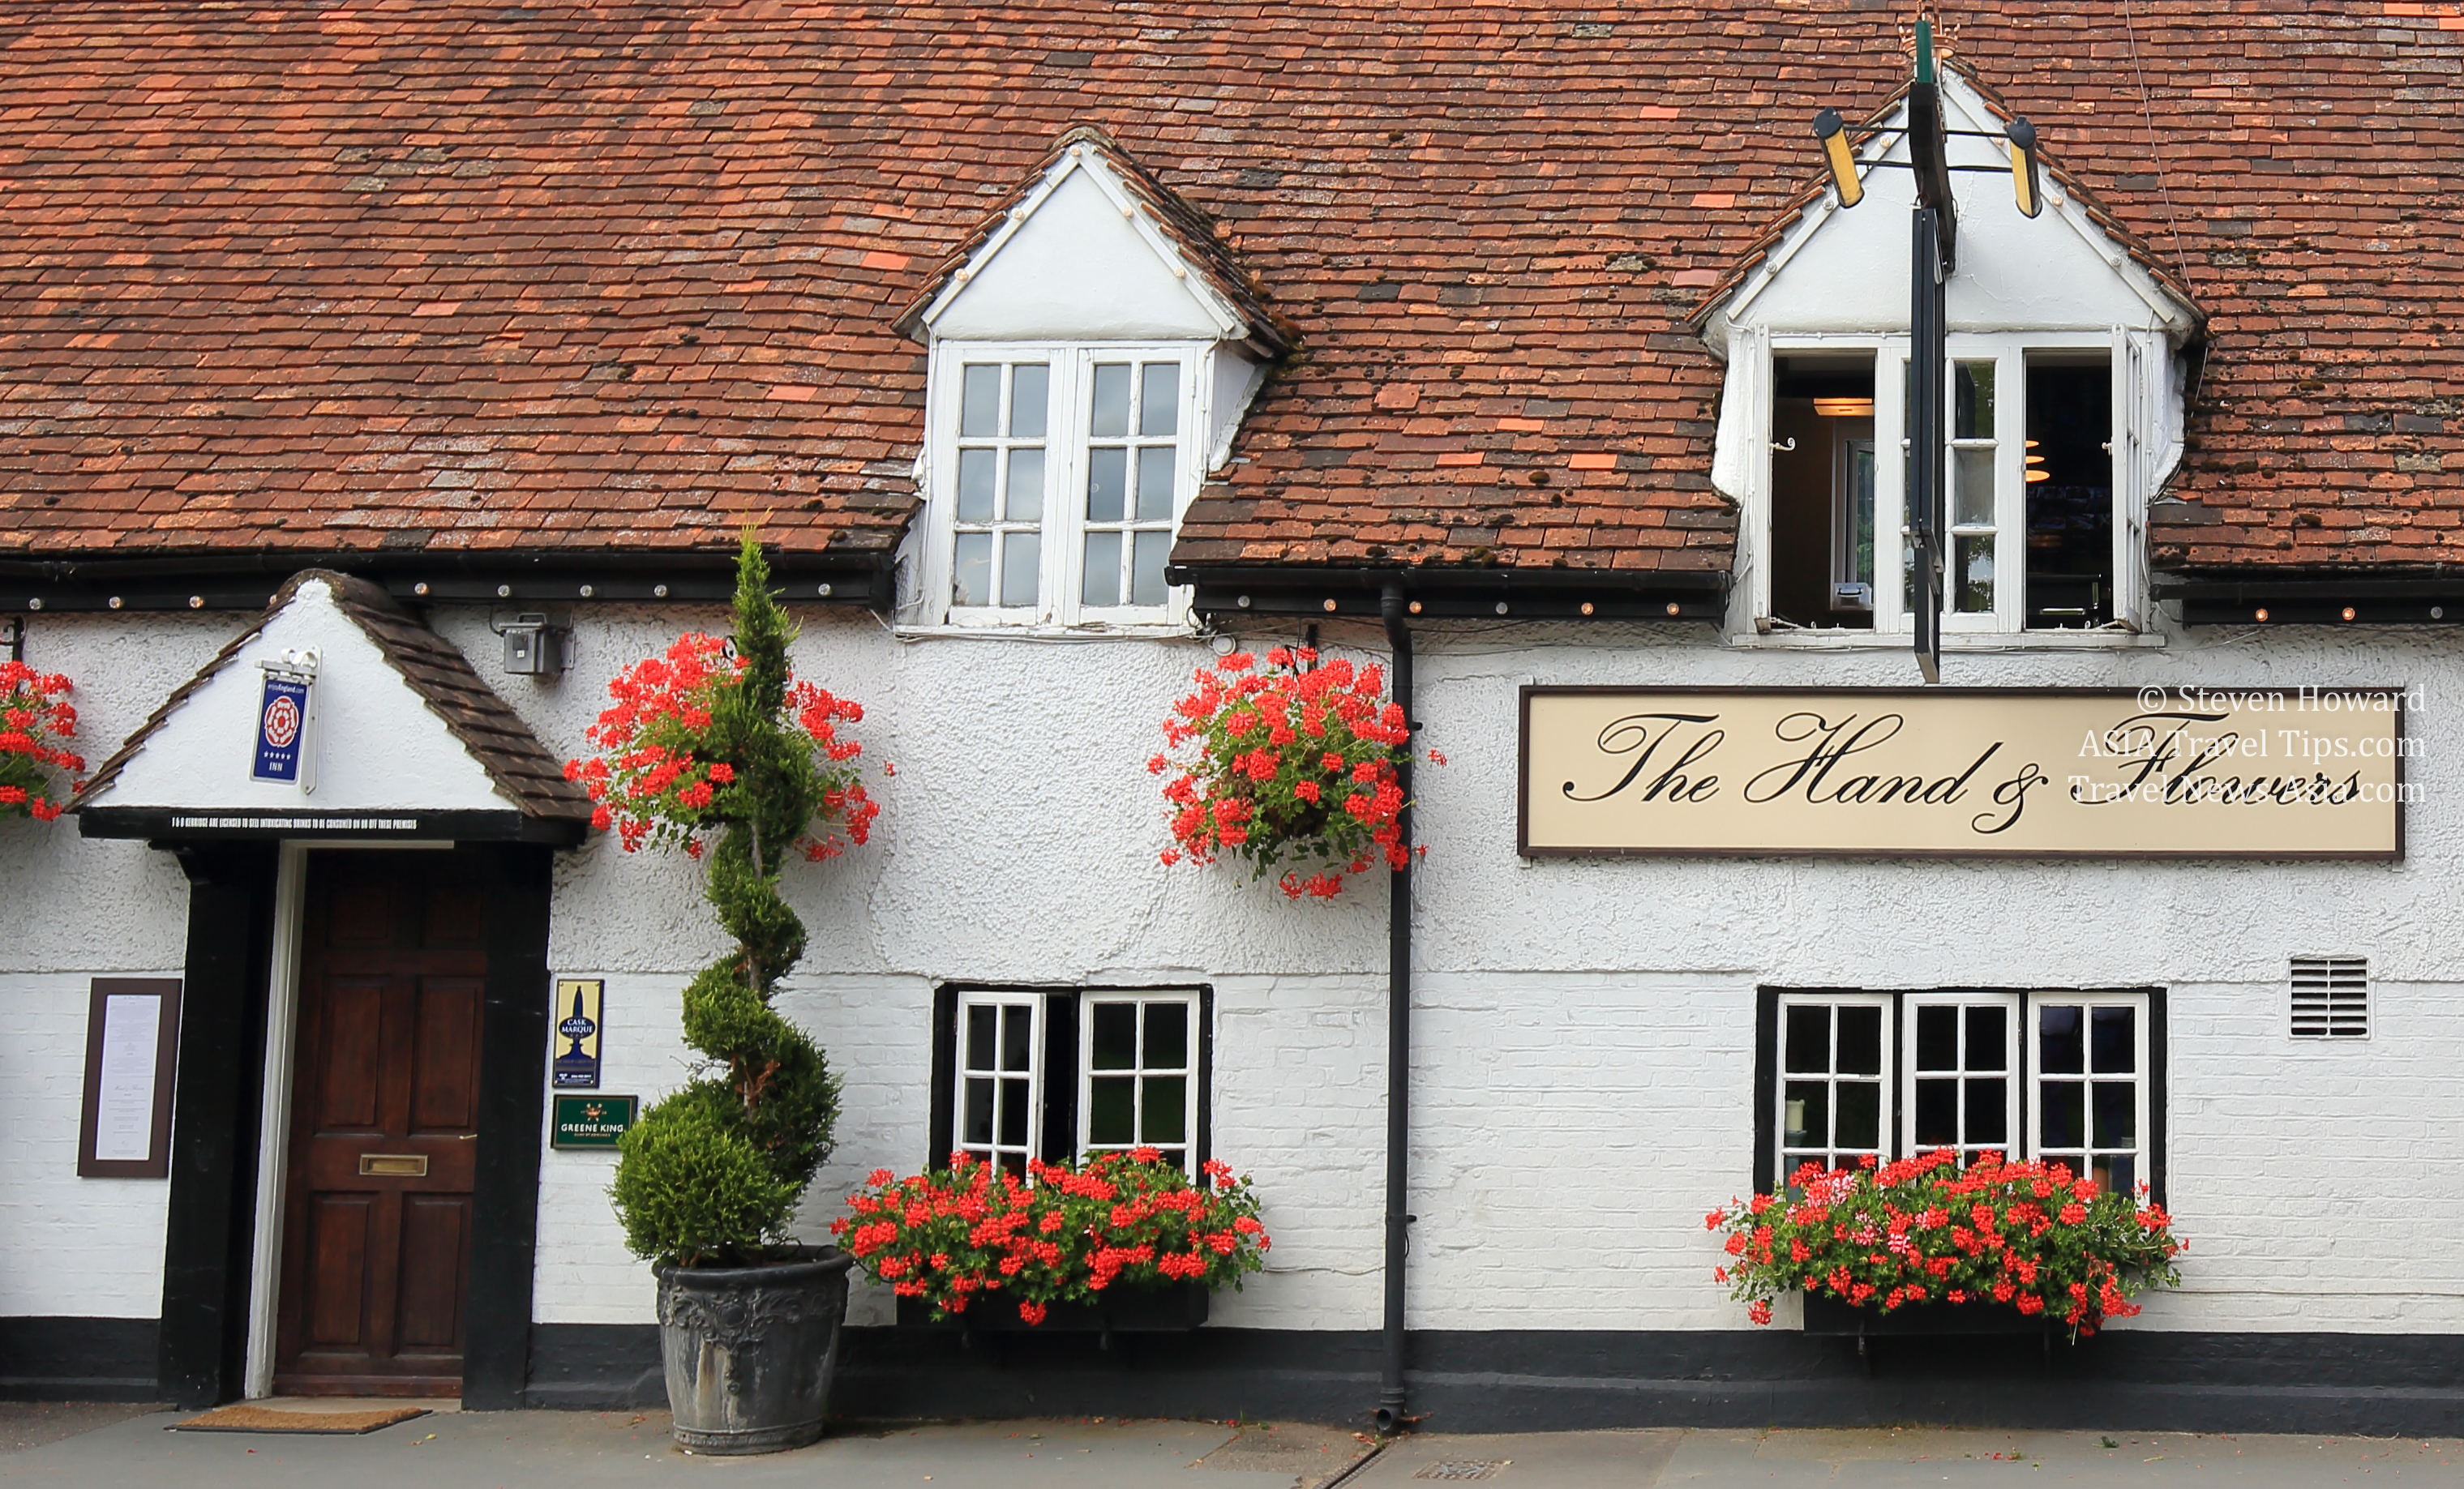 Tom Kerridge's most famous restaurant, the Hand & Flowers in Marlow, England attracts visitors from all over the world. Advance reservations are strongly advised. Picture by Steven Howard of TravelNewsAsia.com Click to enlarge.